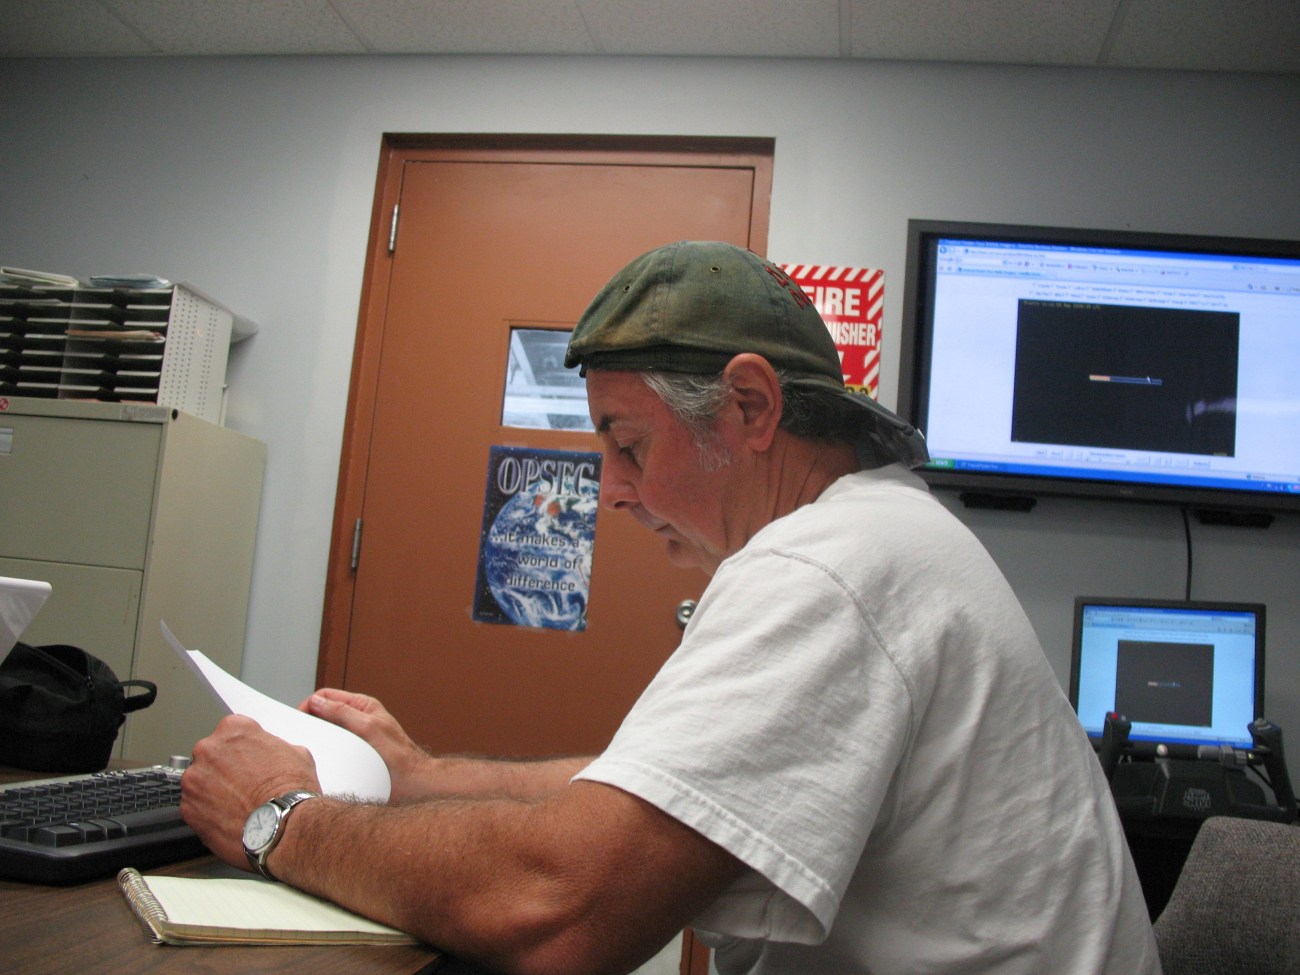 Unidentified at briefing prior to flight into Hurricane Ike